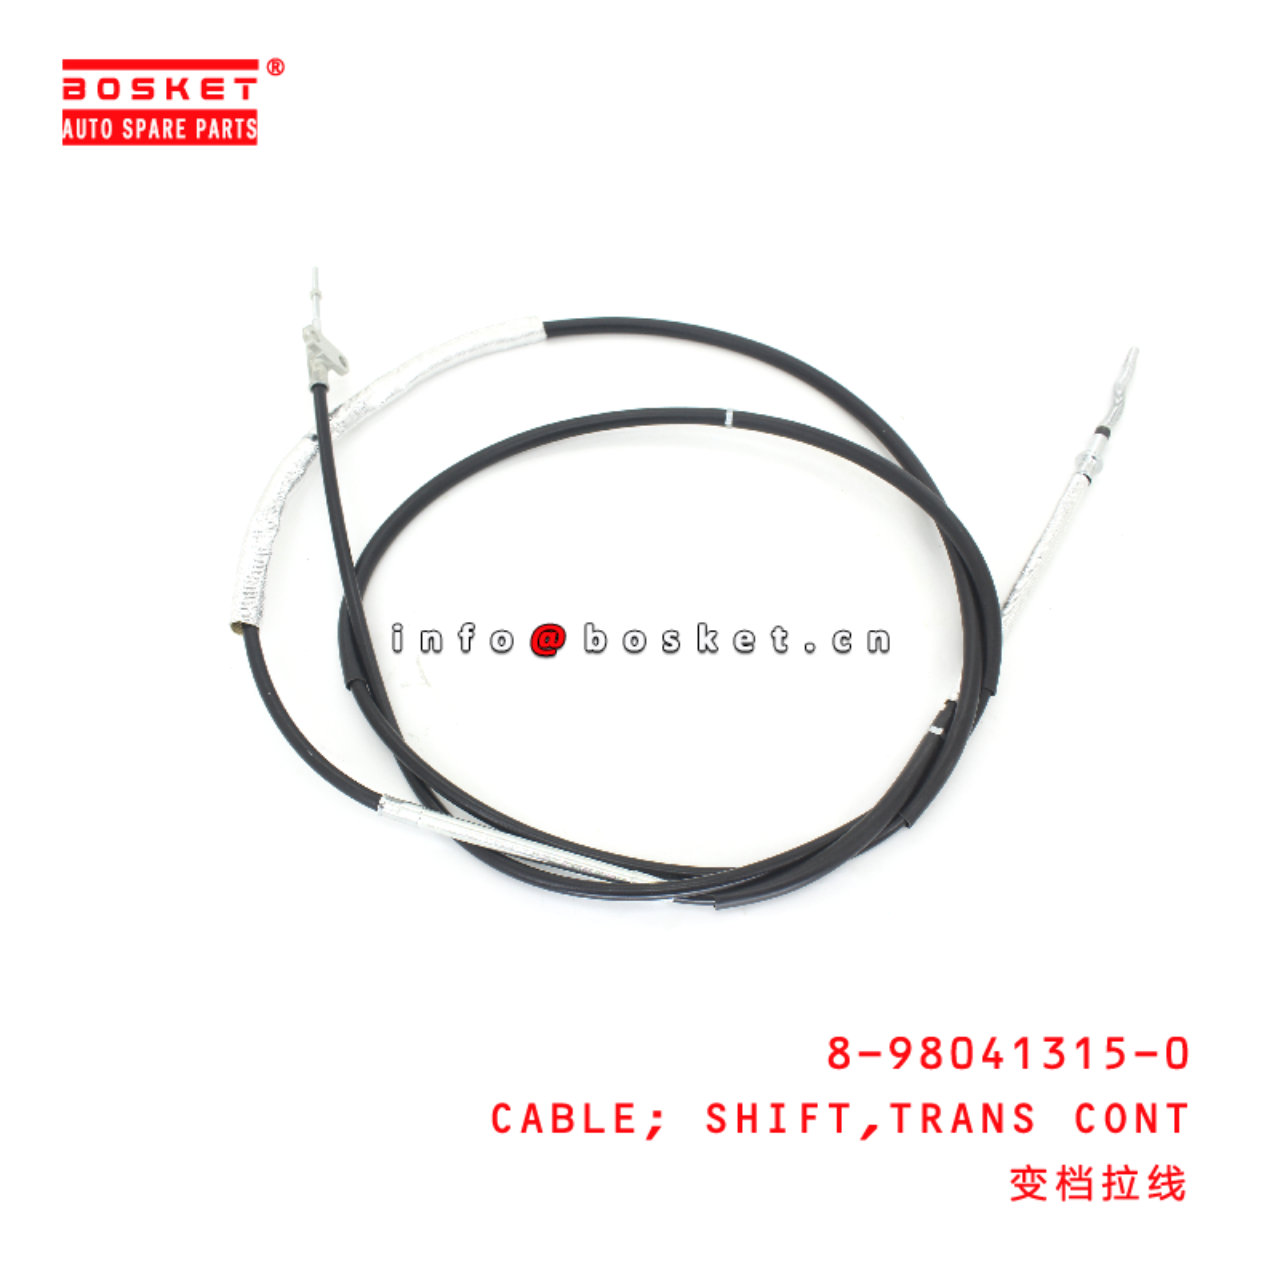 8-98041315-0 TRANSMISSION CONTROL SHIFT CABLE suitable for ISUZU   8980413150